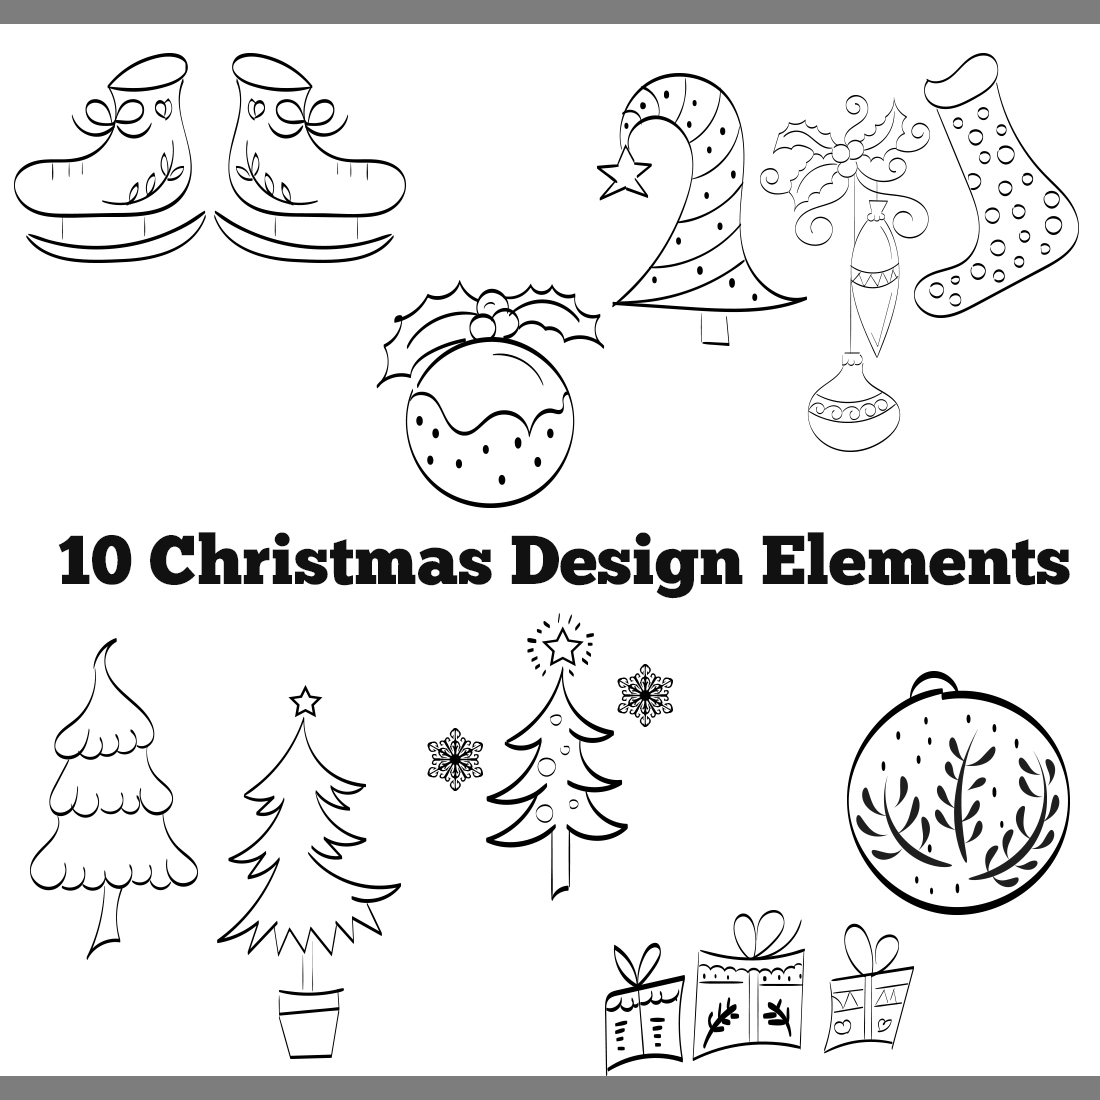 Christmas Quotes Design Elements created by dorothyart.